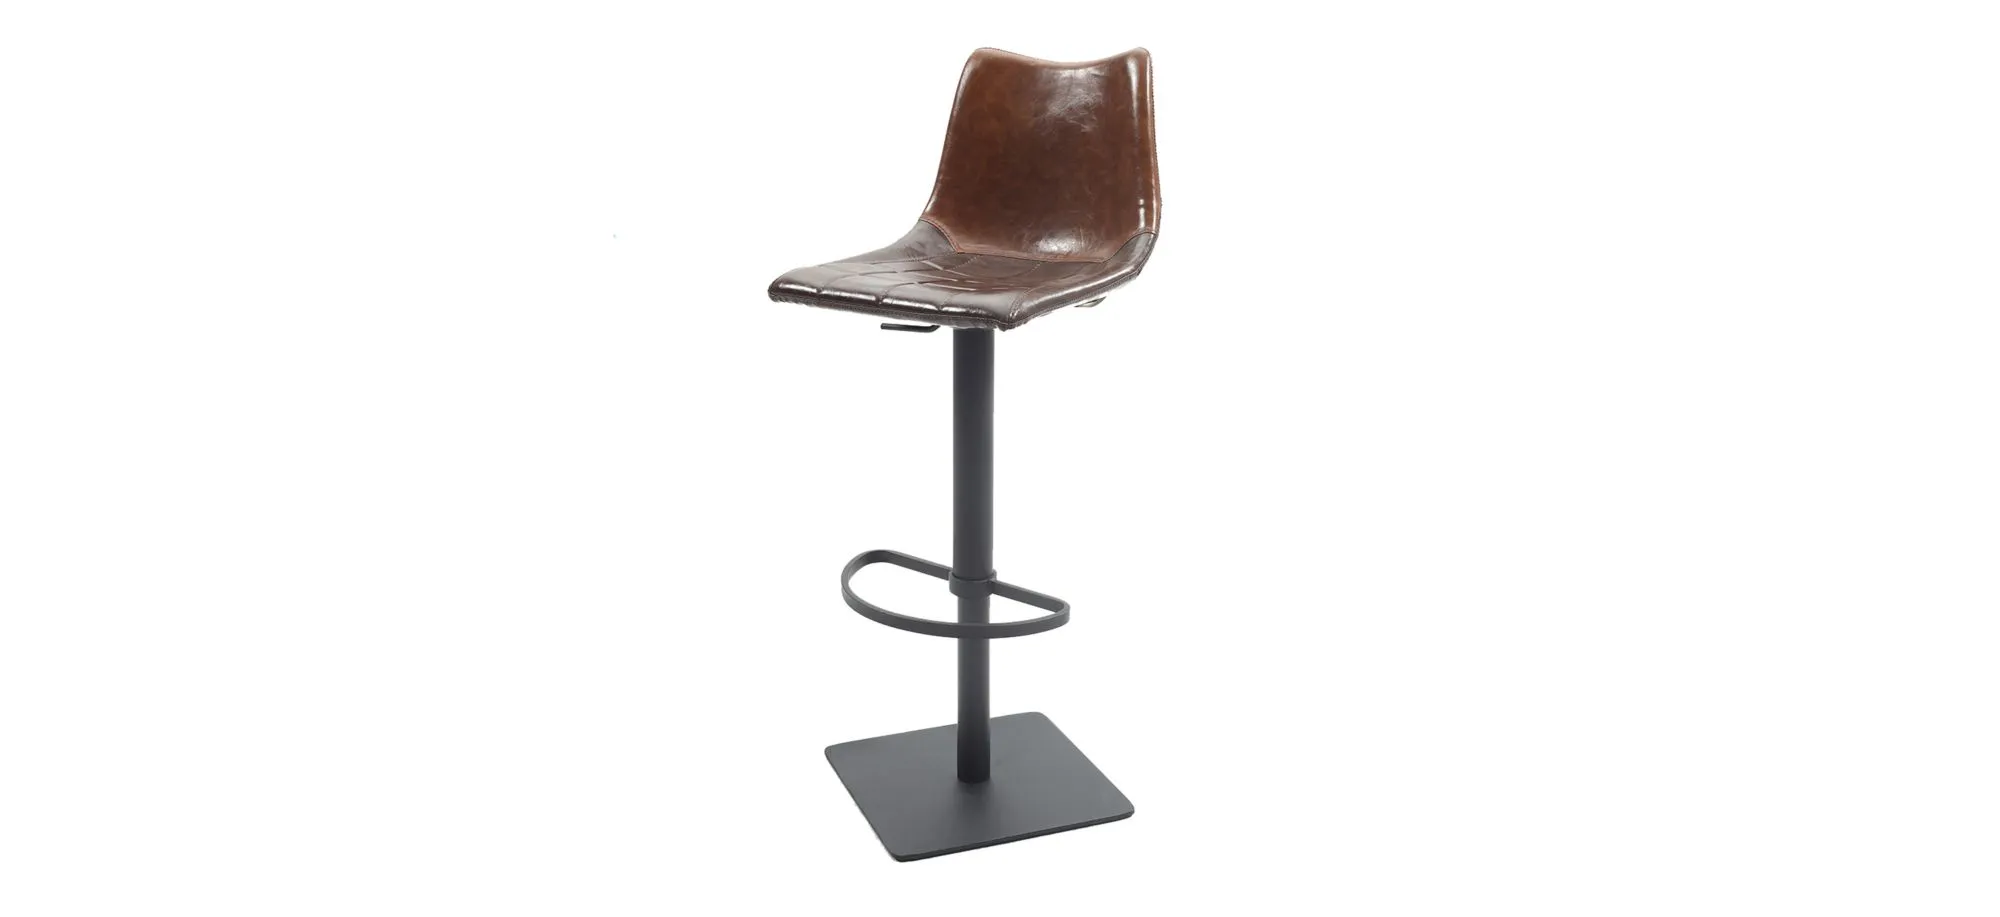 Yeadon Adjustable Stool in Brown by Chintaly Imports